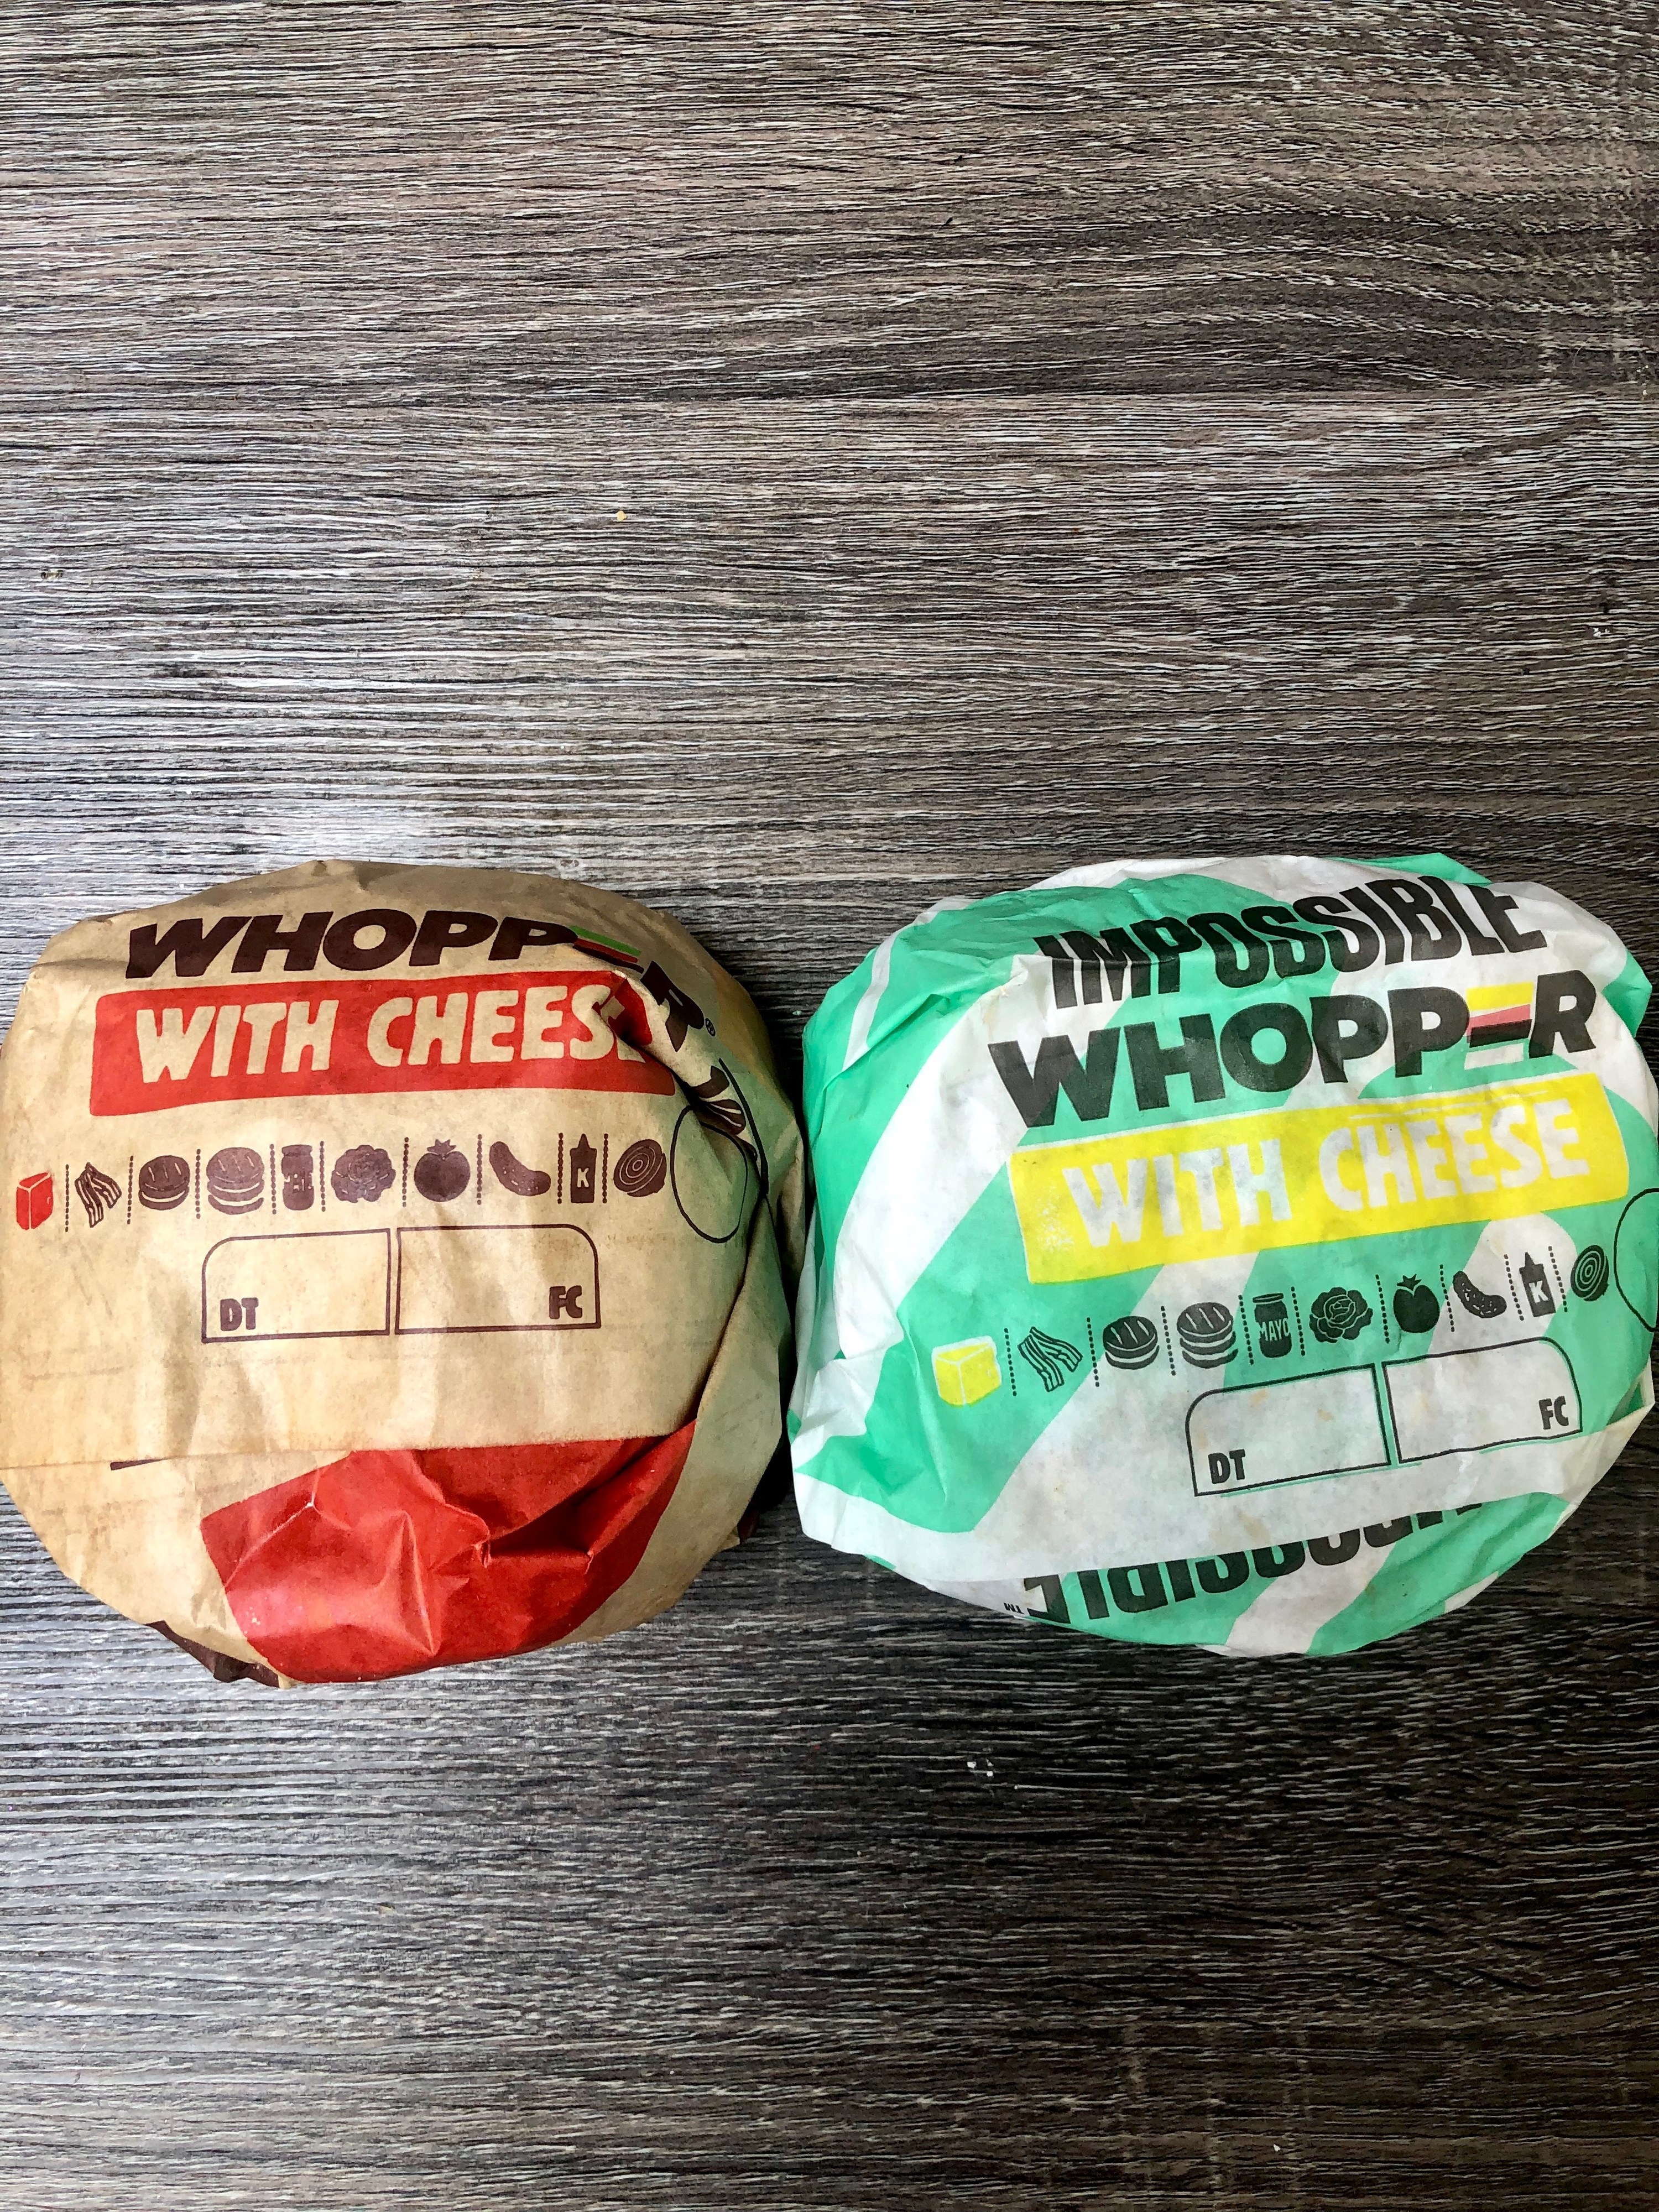 Burger King's New Impossible Whopper Burger Is Identical To The Real Thing